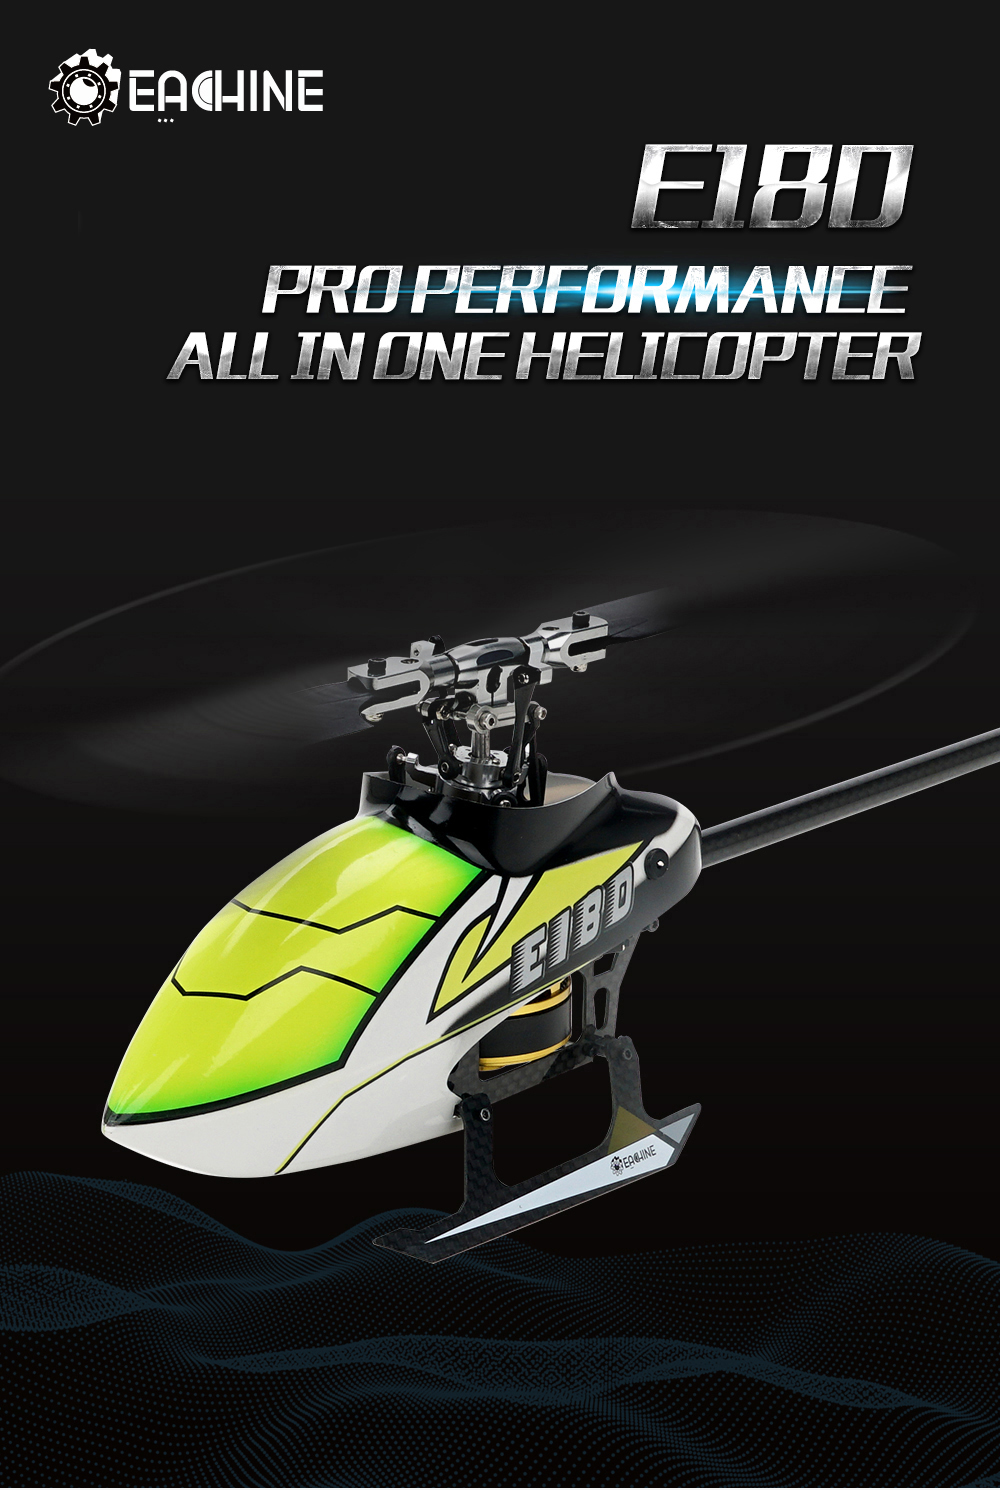 Eachine-E180-6CH-3D6G-System-Dual-Brushless-Direct-Drive-Motor-Flybarless-RC-Helicopter-RTF-Compatib-1810191-1